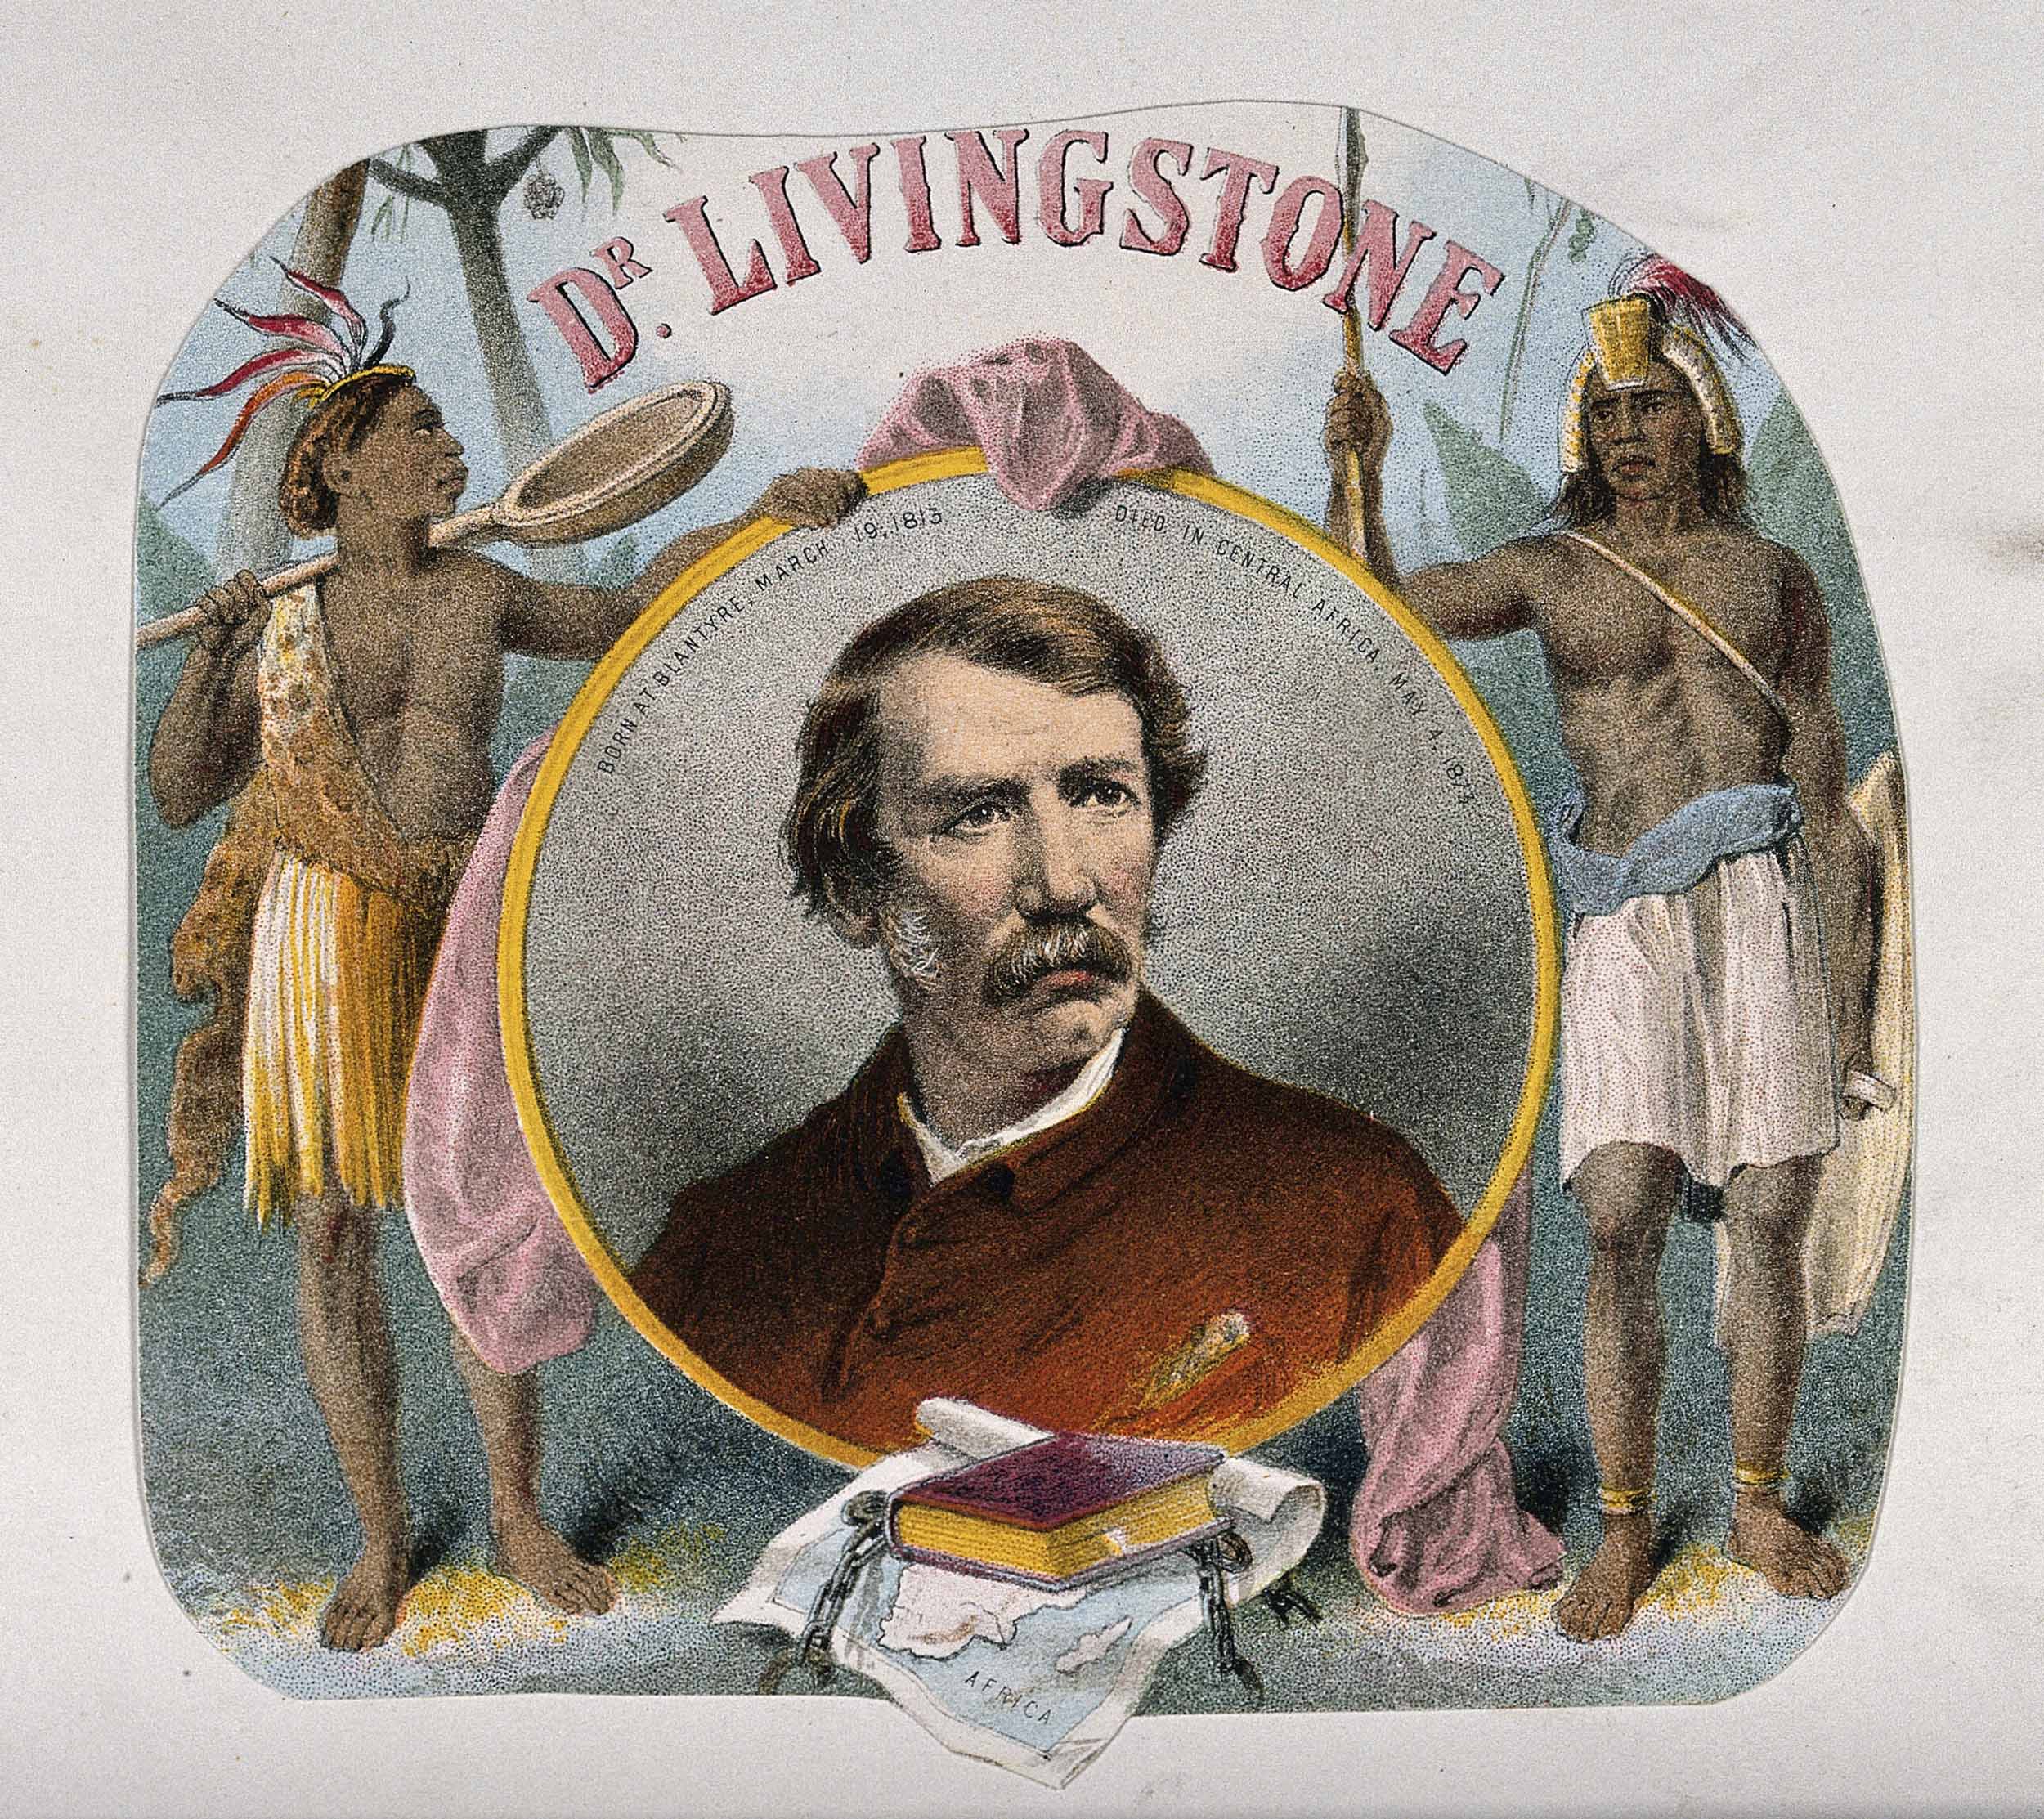 Lithograph of David Livingstone. Copyright Wellcome Library, London. Creative Commons Attribution 4.0 International (https://creativecommons.org/licenses/by/4.0/).